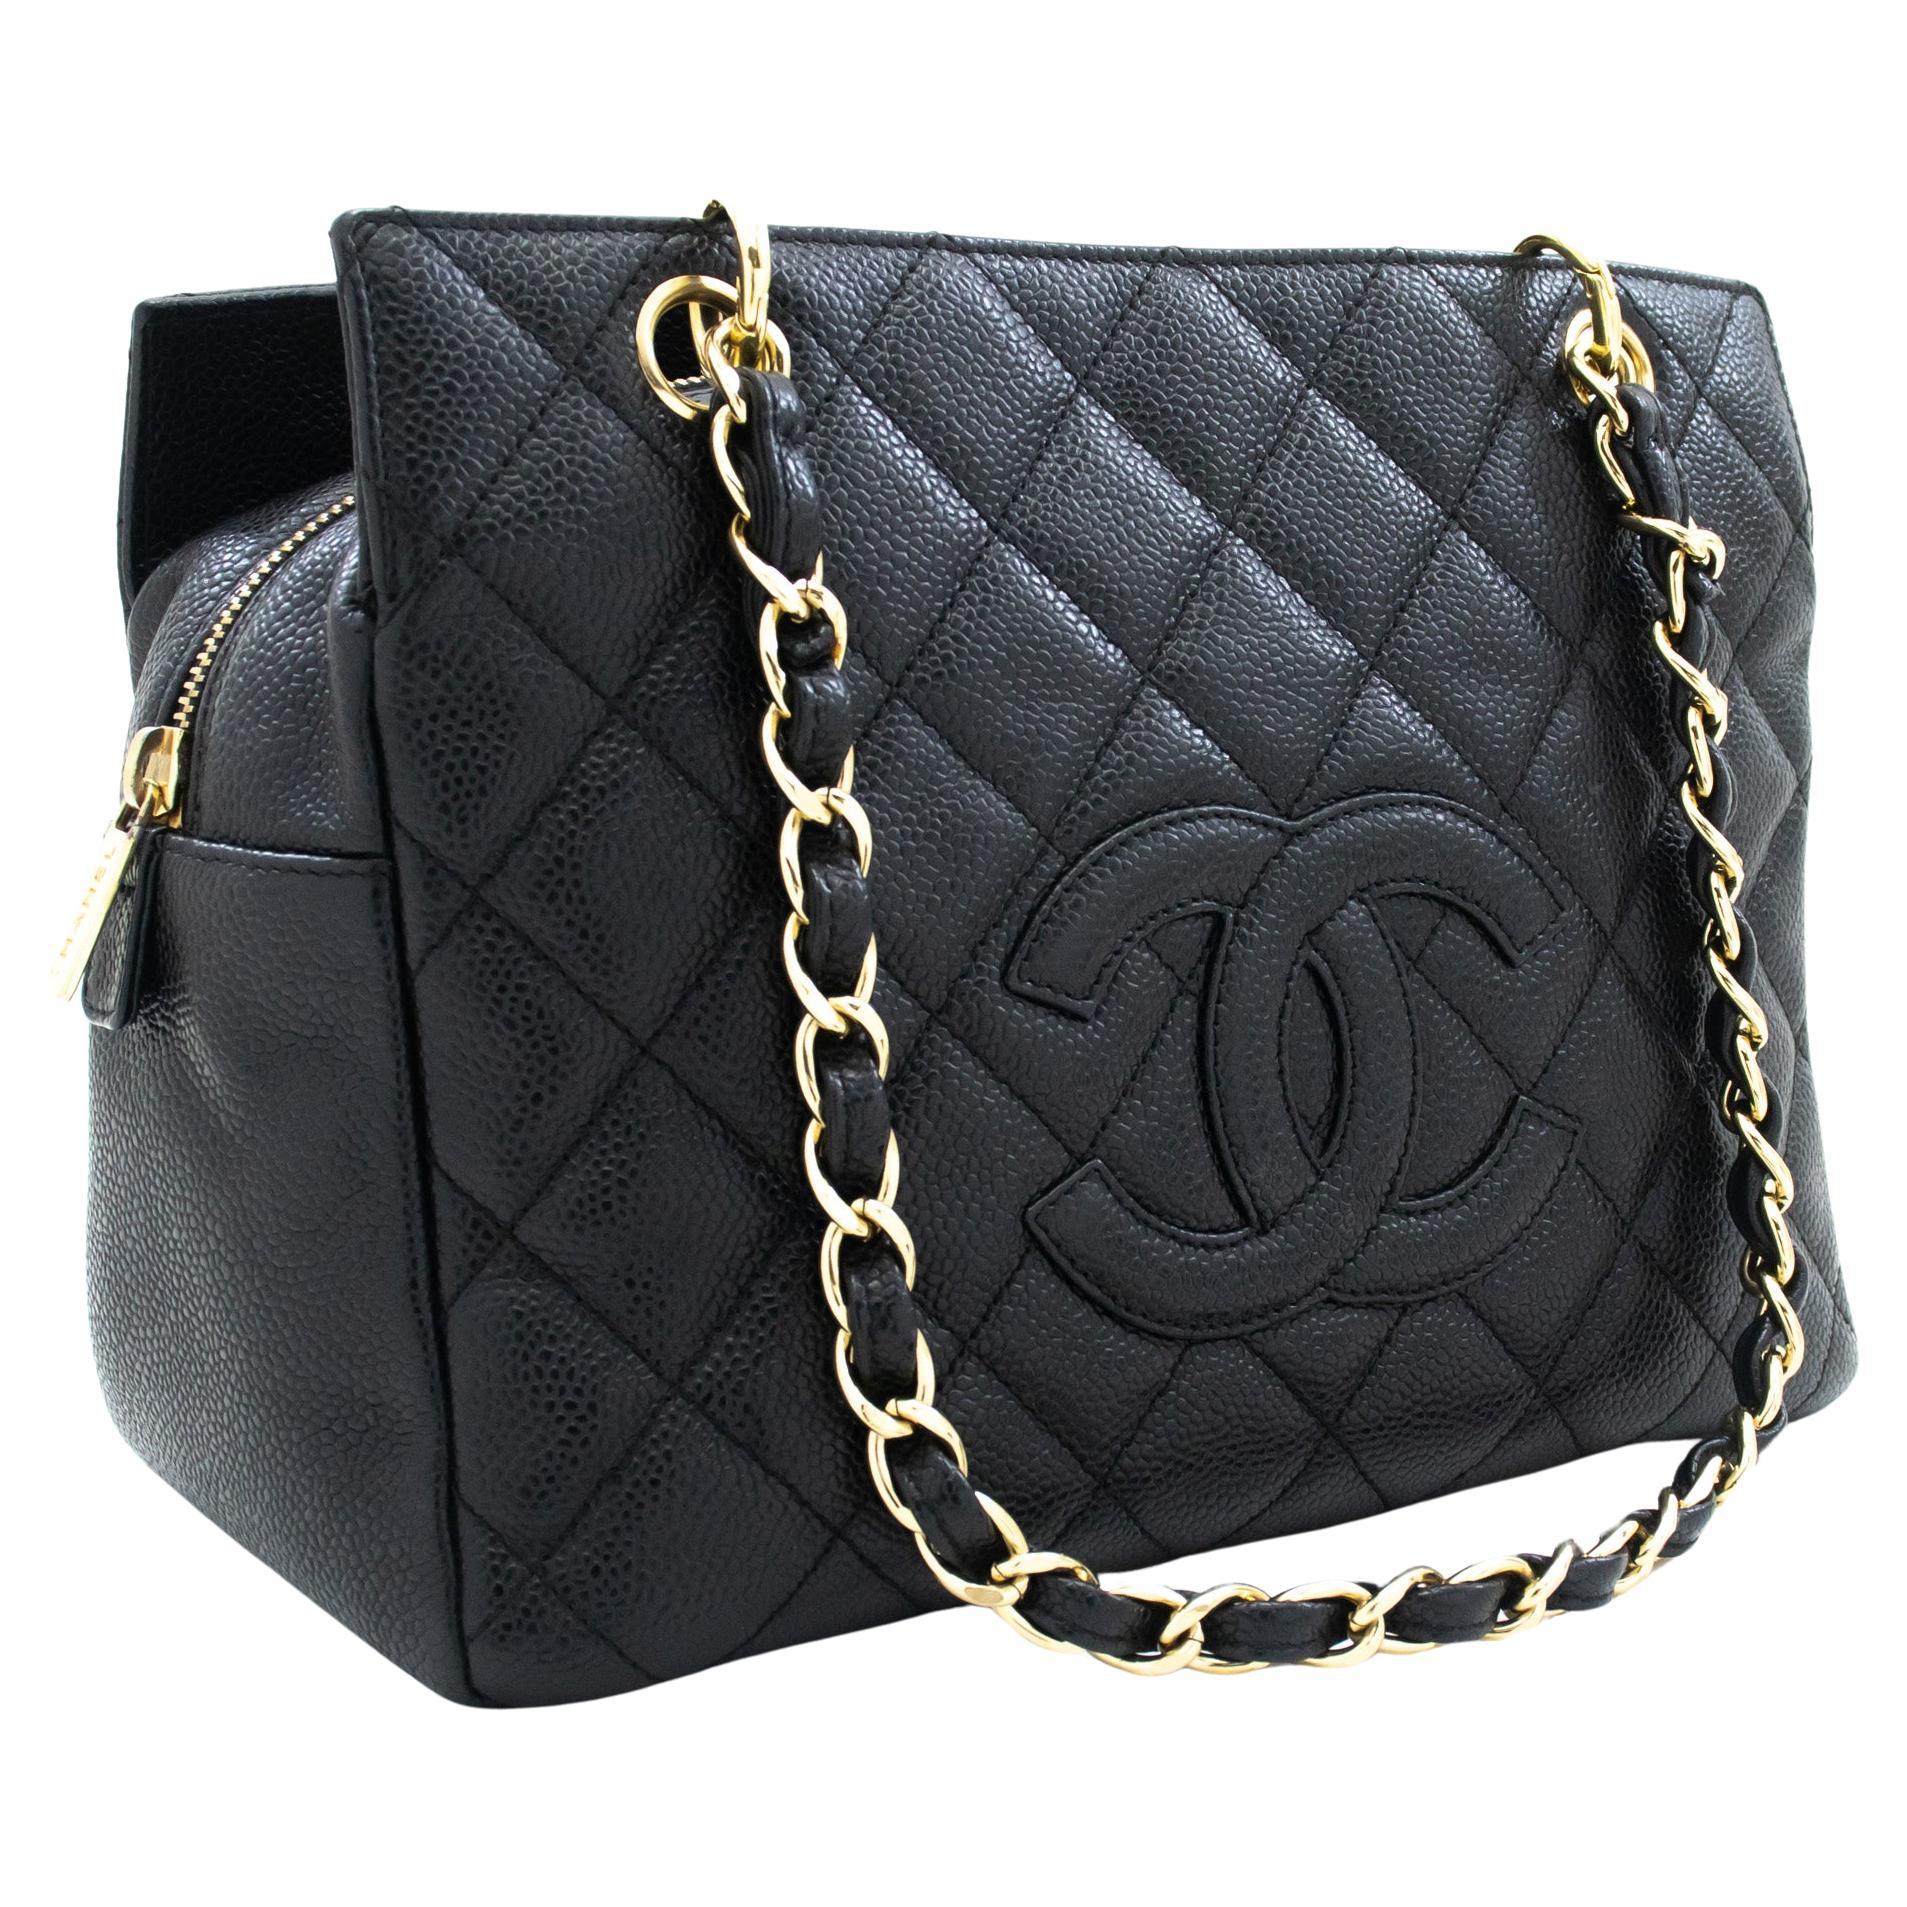 Black Chanel Purse With Gold Chain - 435 For Sale on 1stDibs